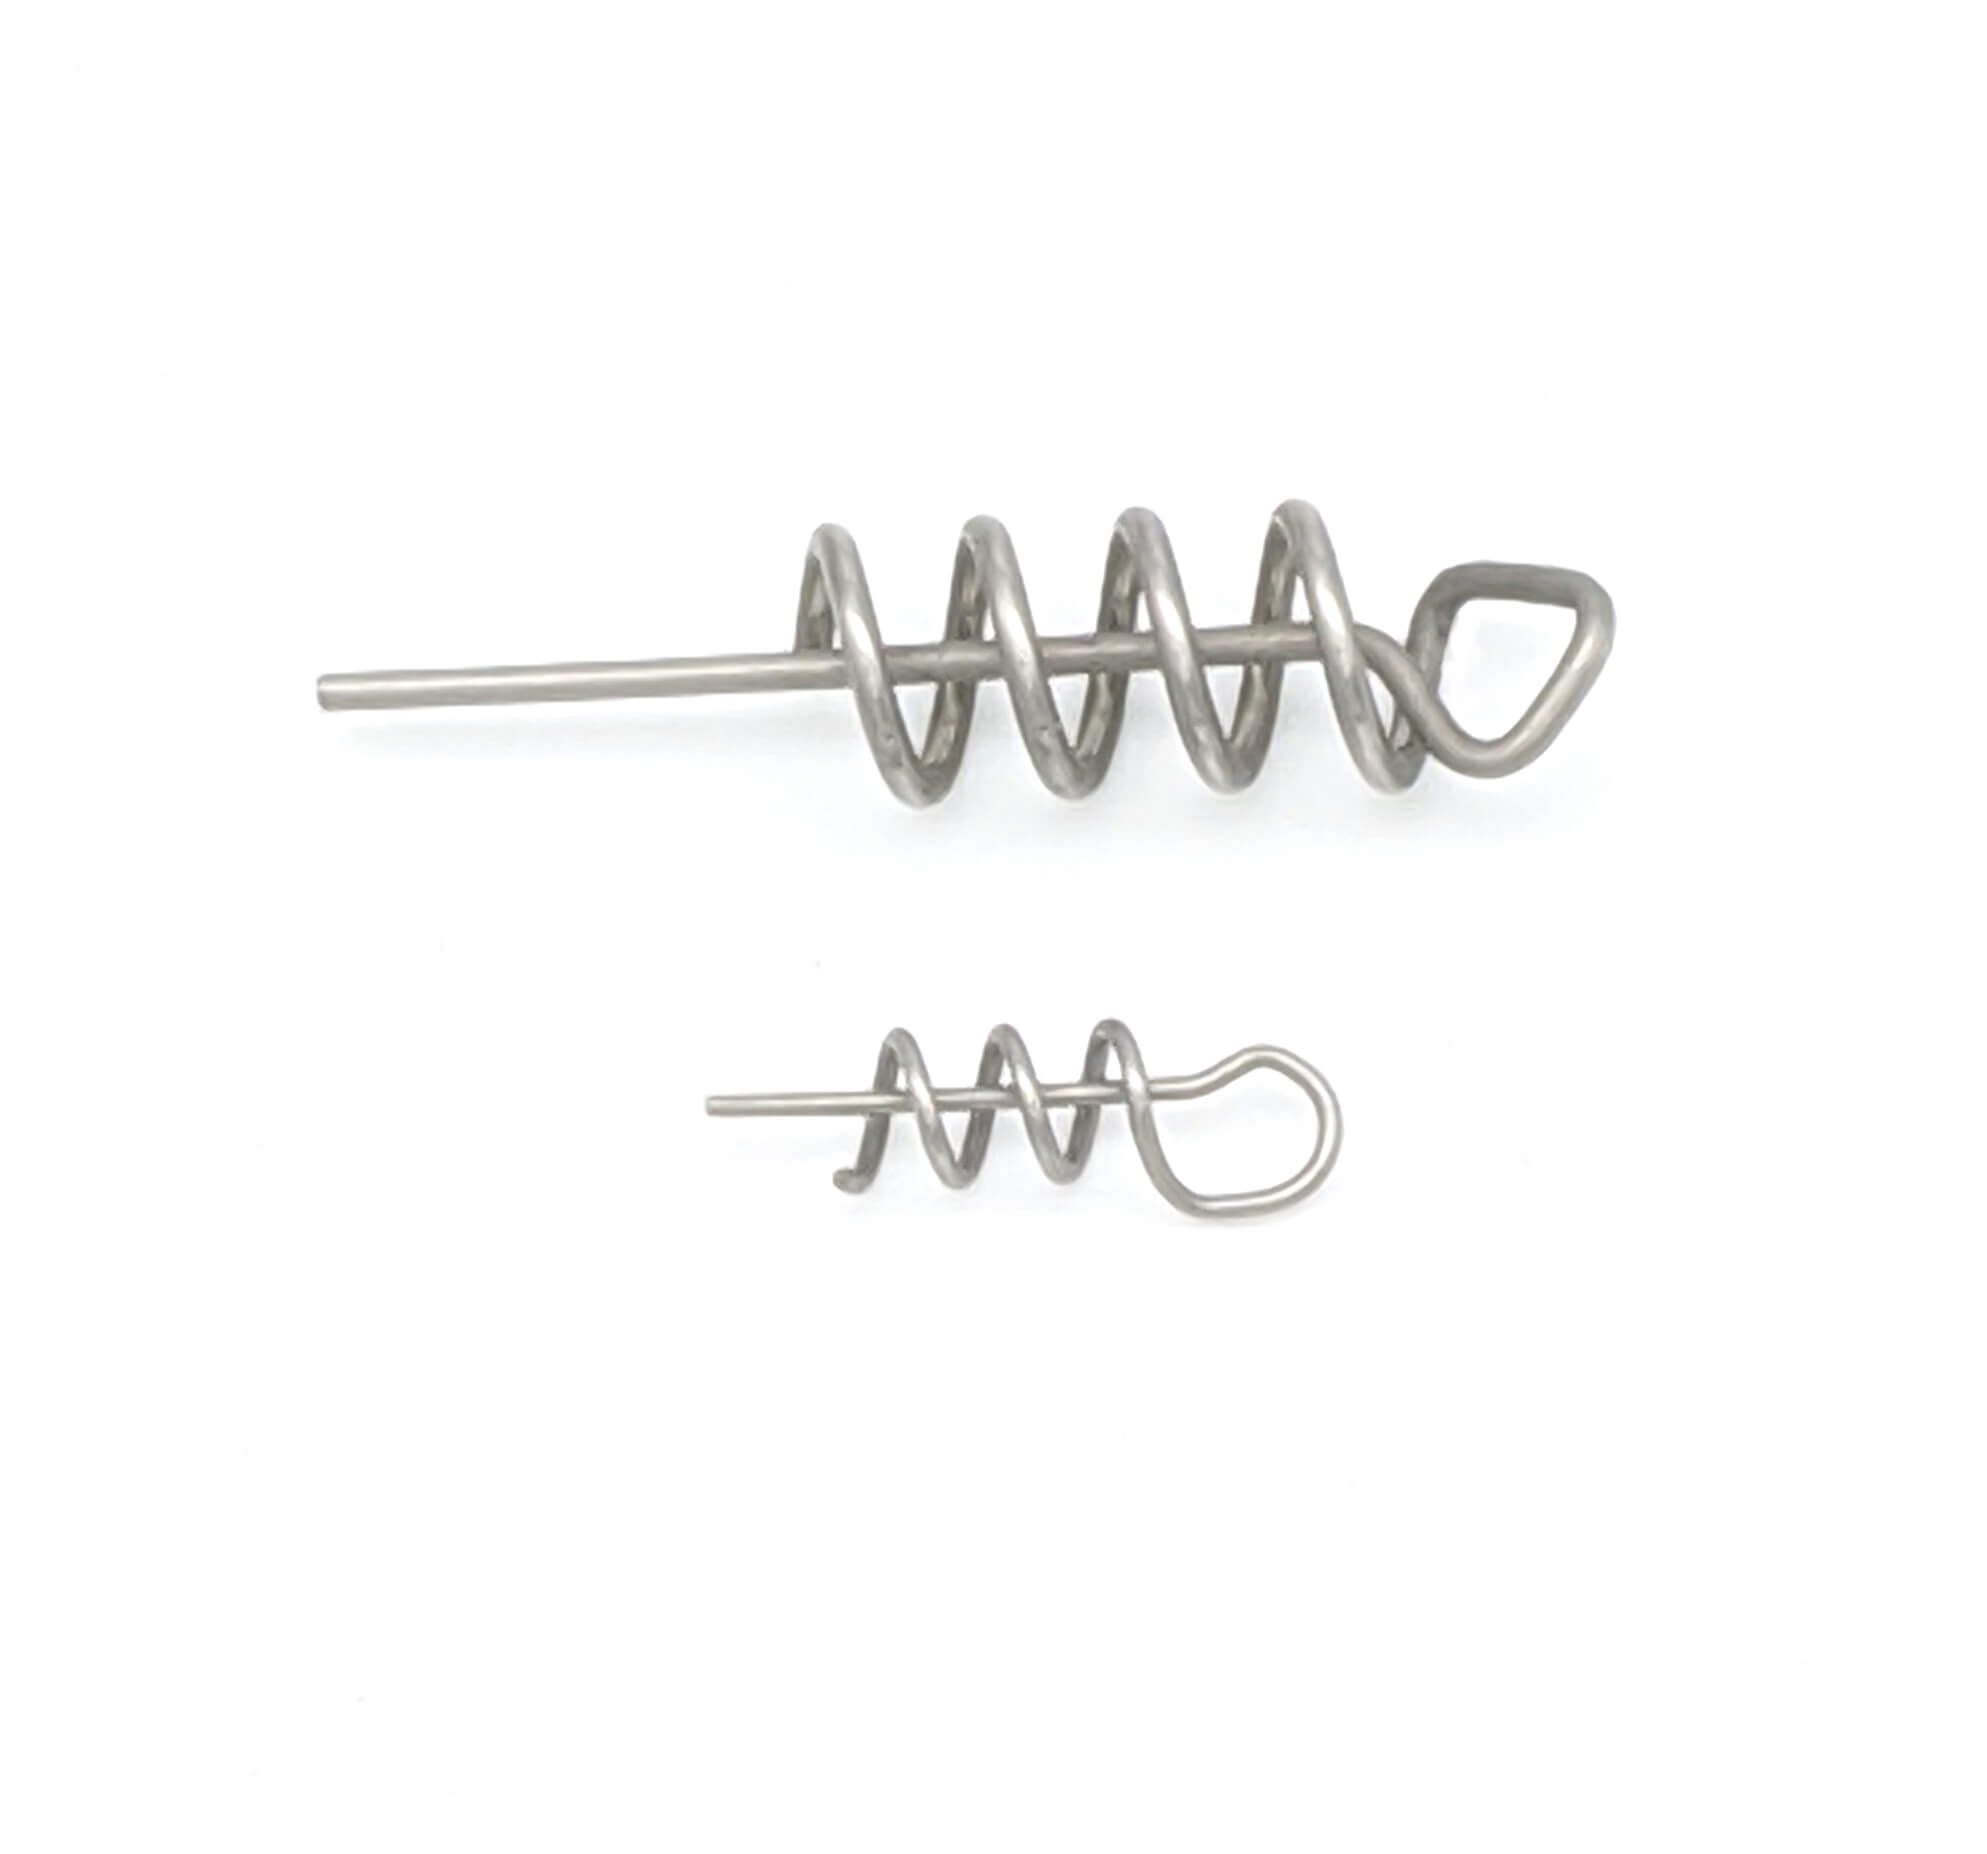 Springs and Wire Forms for Fishing Tackle, Lure Wire